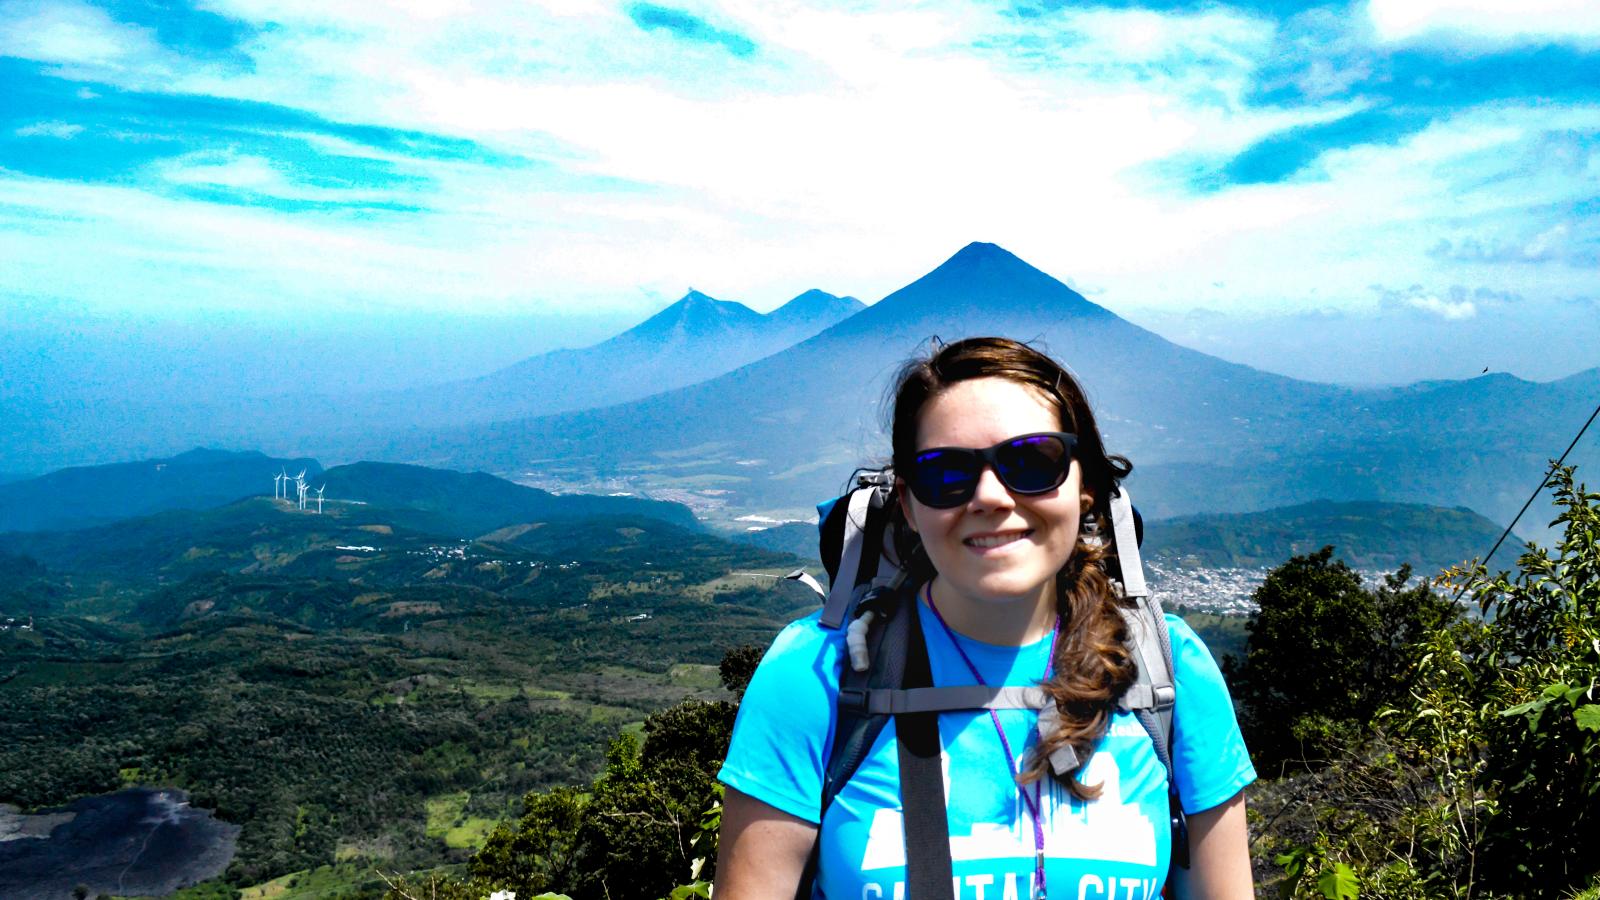 Lindsey standing on Pacaya Volcano, Guatemala, with Pacaya lava flows visible on the left, and Agua, and Fuego-Acatenango Volcanoes in the background 